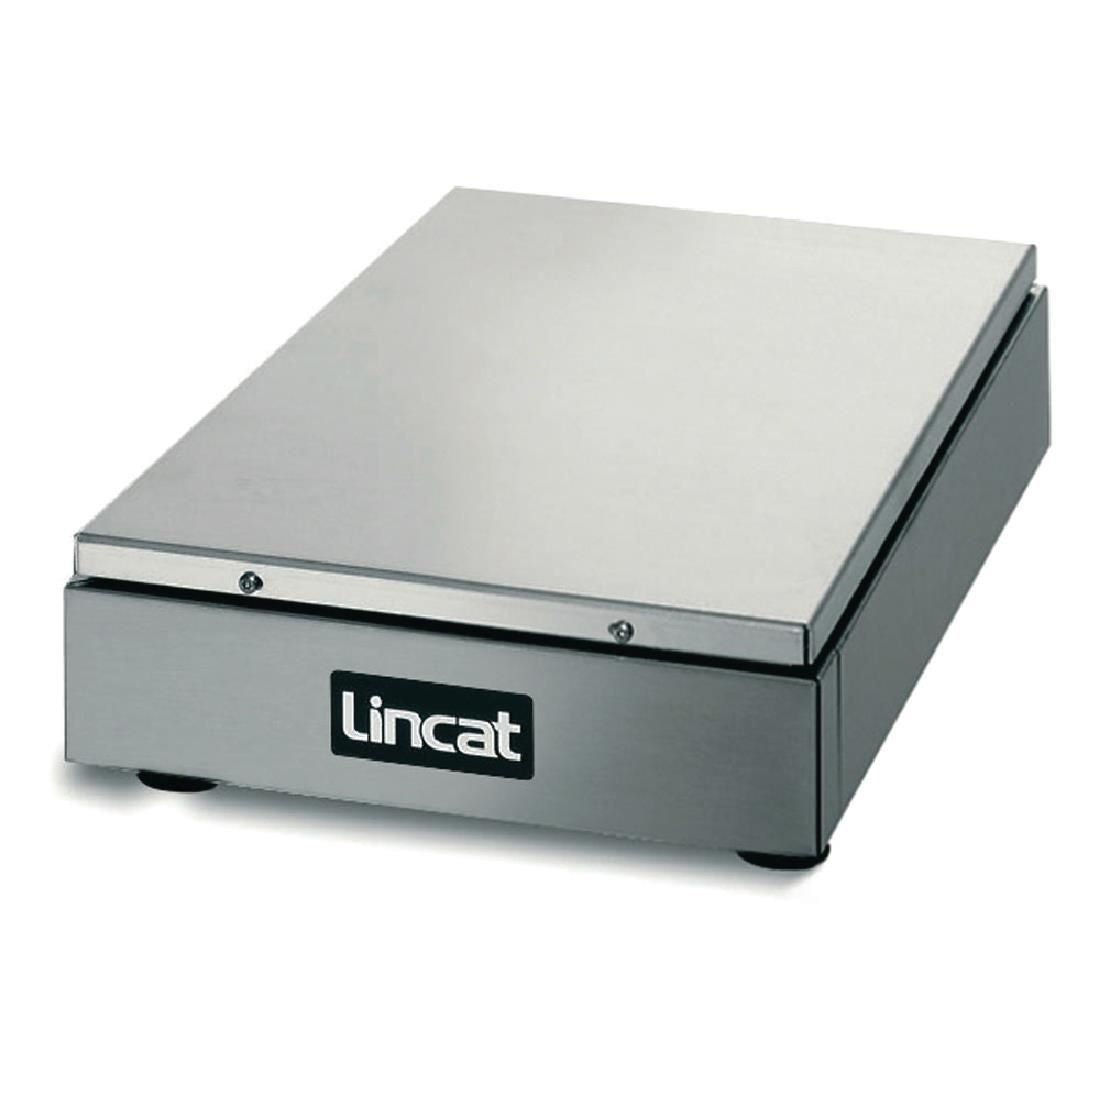 HB1 - Lincat Seal Counter-top Heated Display Base - 1 x 1/1 GN - W 380 mm - 0.5 kW GJ749 JD Catering Equipment Solutions Ltd